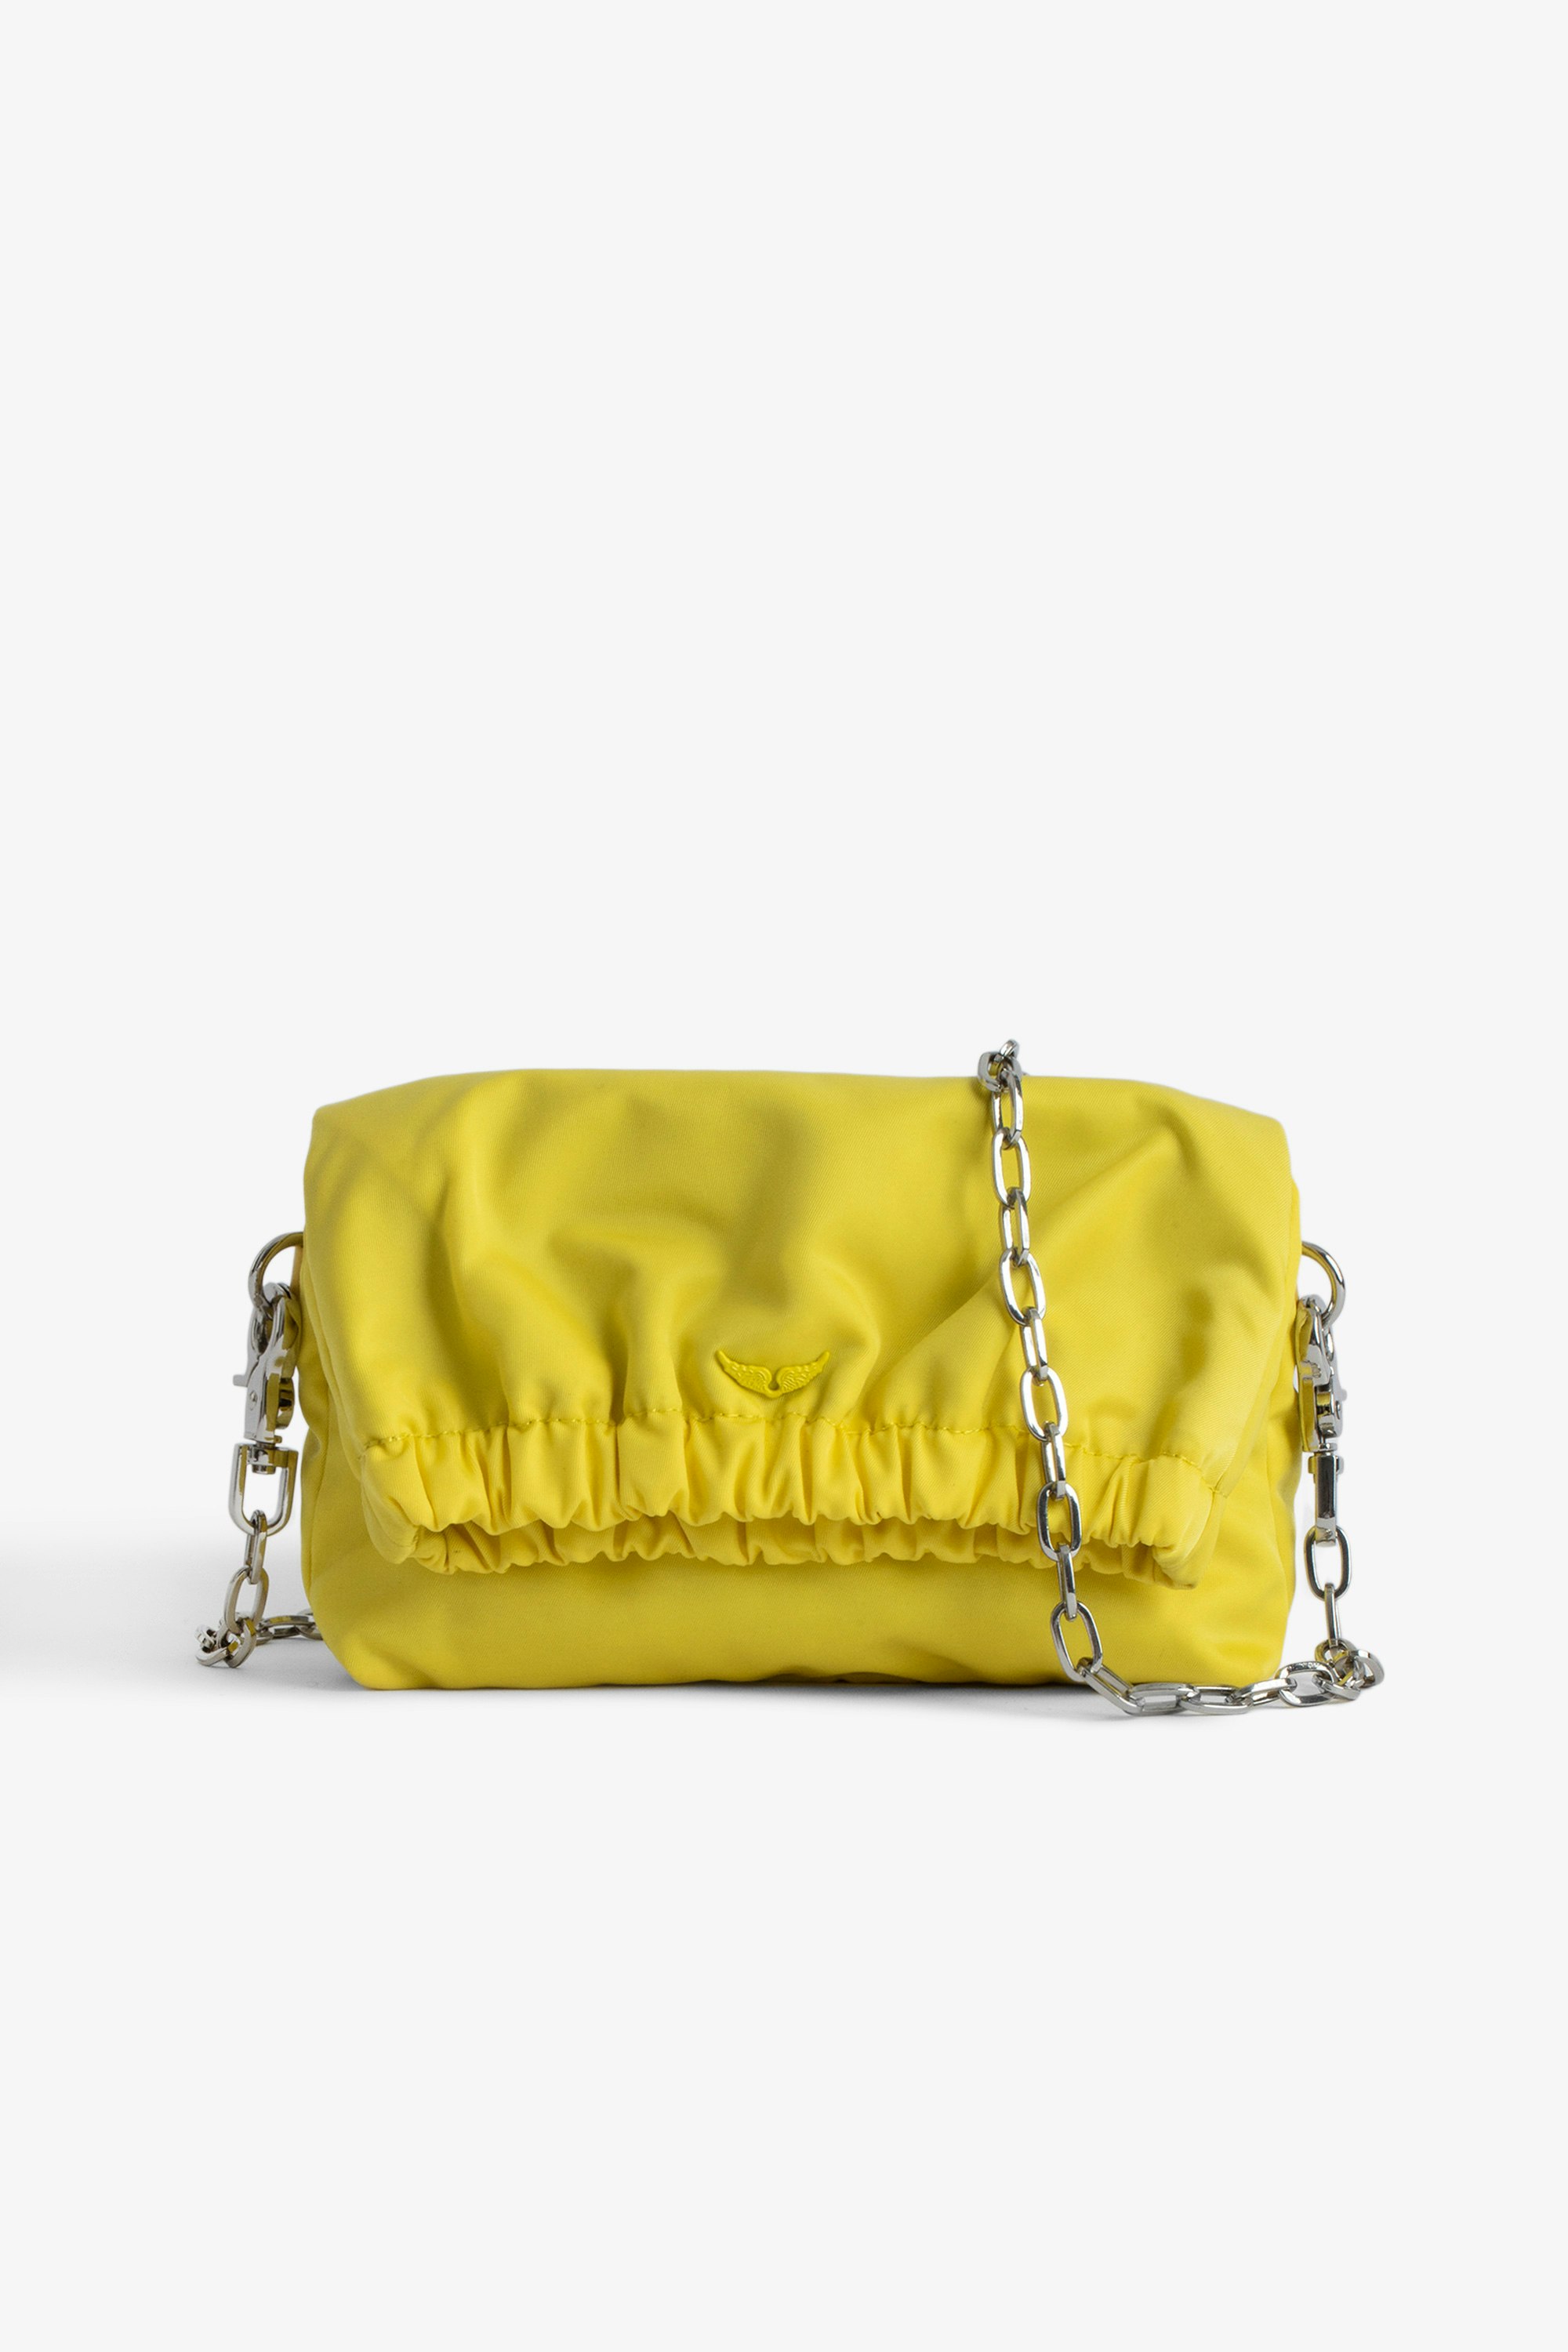 Rockyssime XS バッグ Women’s small clutch bag in yellow nylon with metal chain